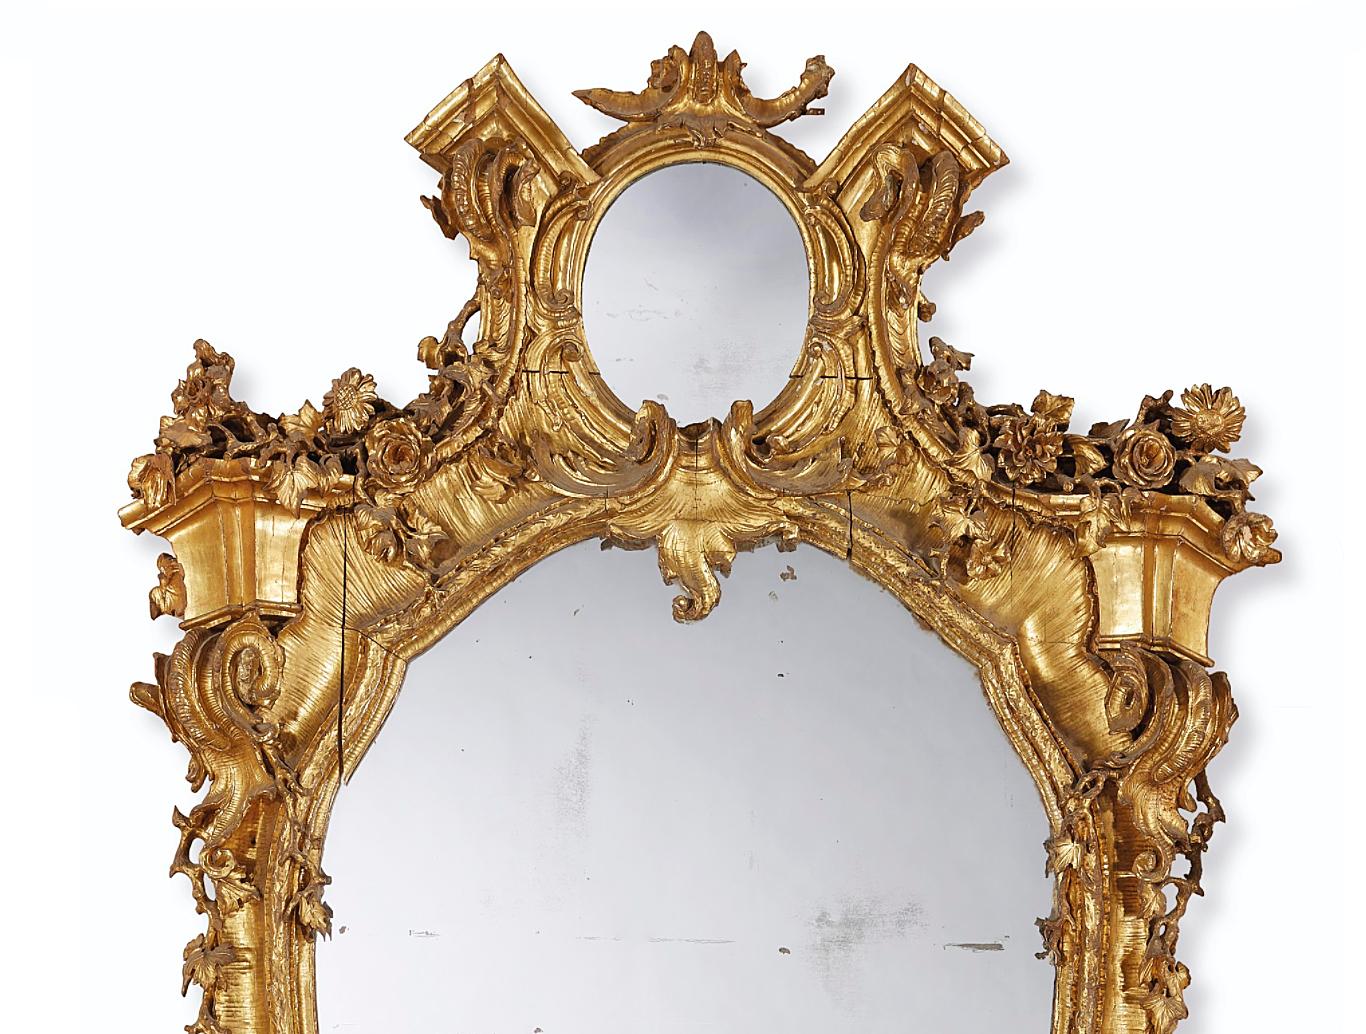 A large 19th century Italian giltwood mirror, the shaped frame carved with garlands of flowers and leaves, on a scallop shell background, with an oval mirror panel to the top flanked by architectural corbels, draped with flowers. Retaining good